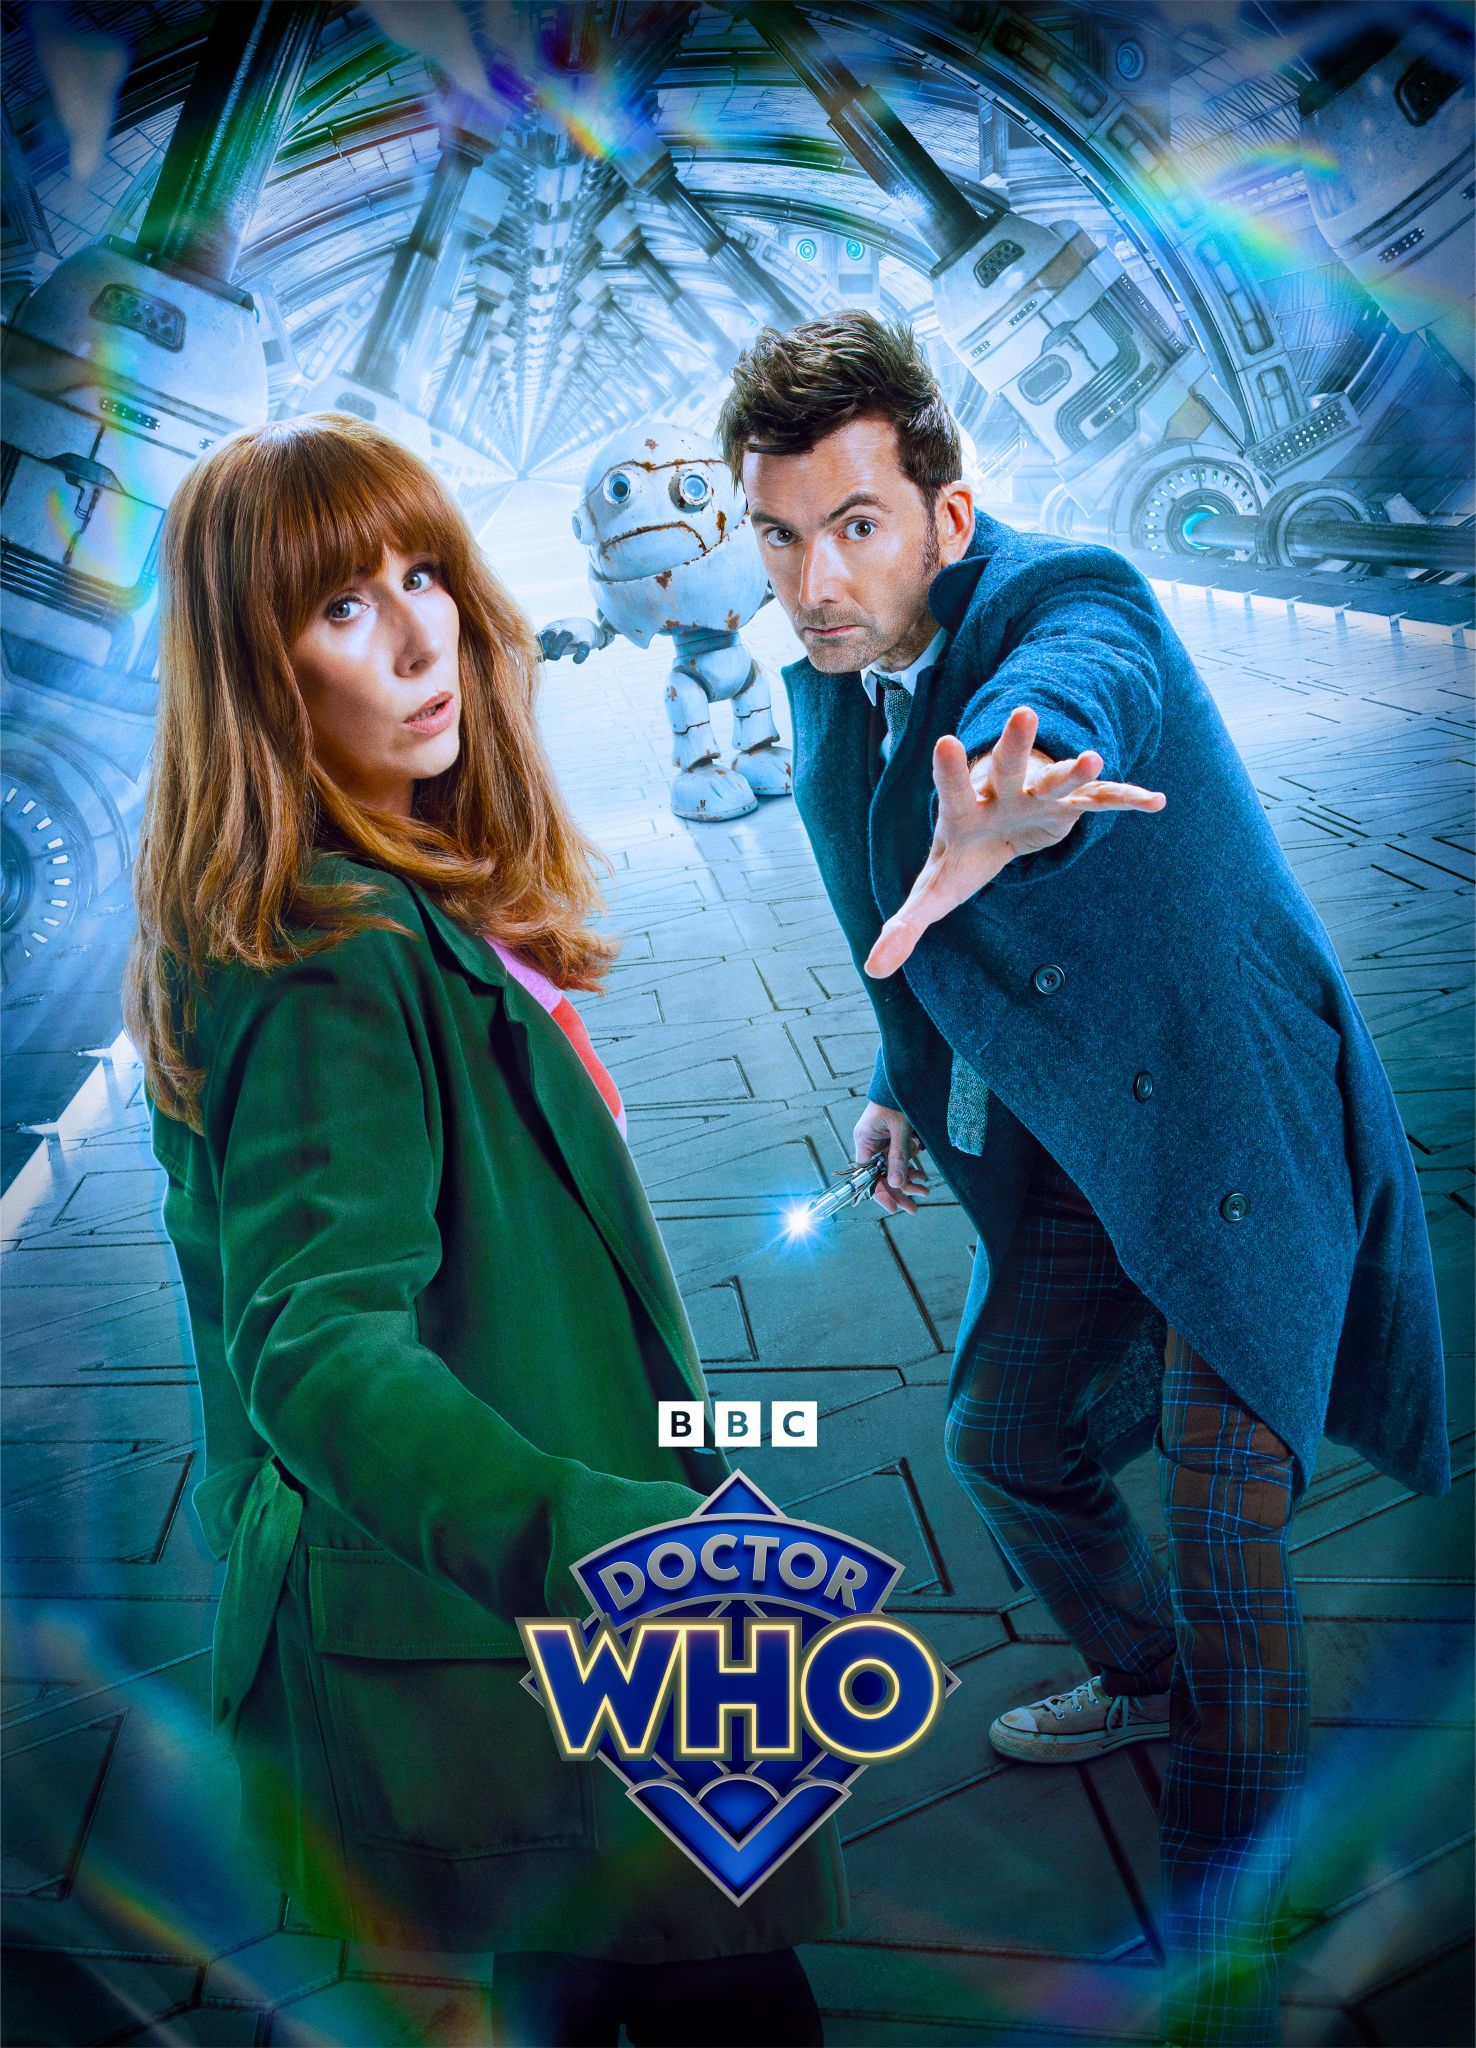 Doctor Who 2005 S14E00 Wild Blue Yonder 720p NL-subs + multi